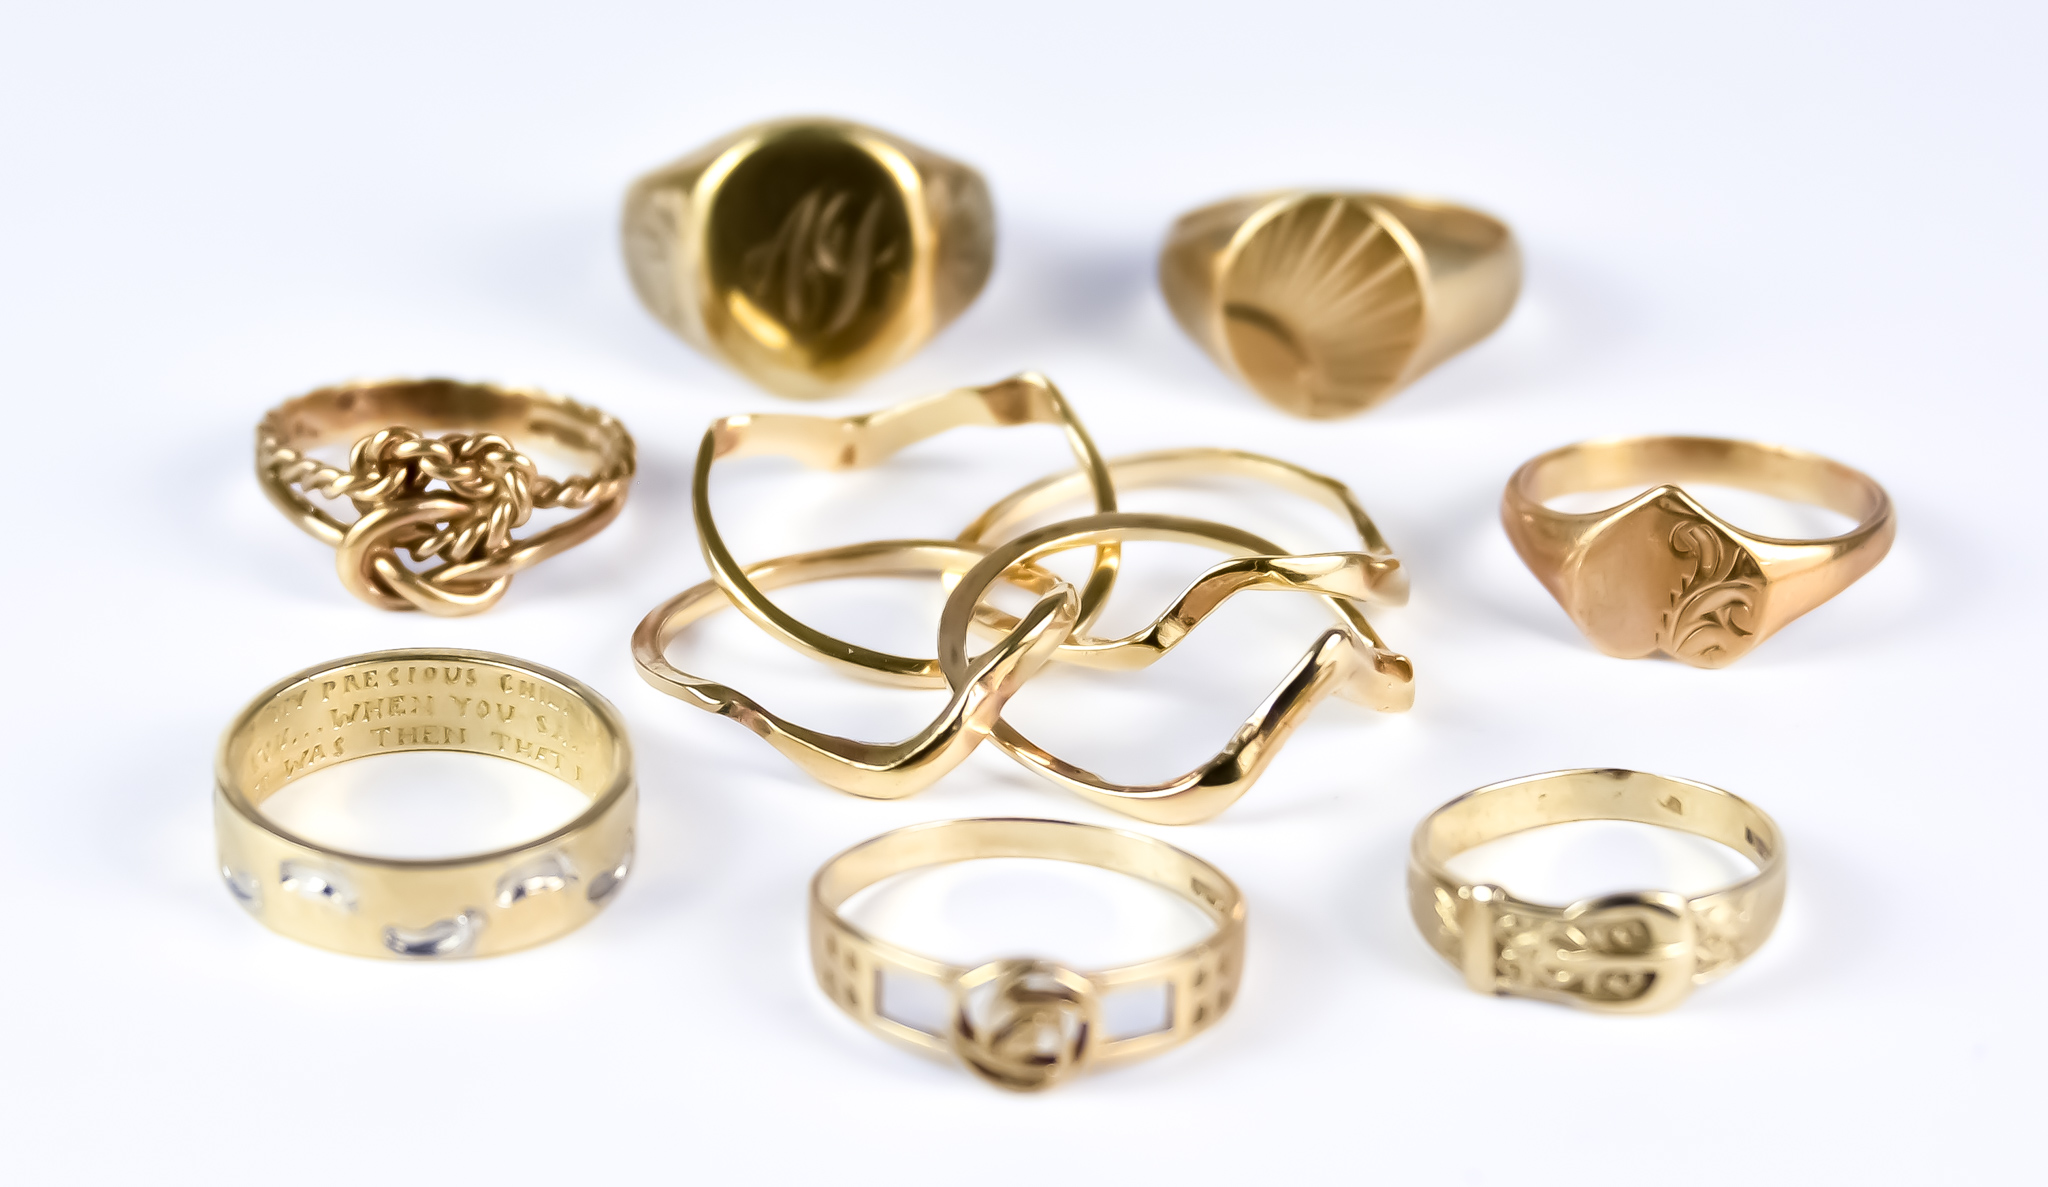 A Mixed Lot of 9ct Gold Rings, Modern, comprising - one puzzle ring, size L, one gentleman's